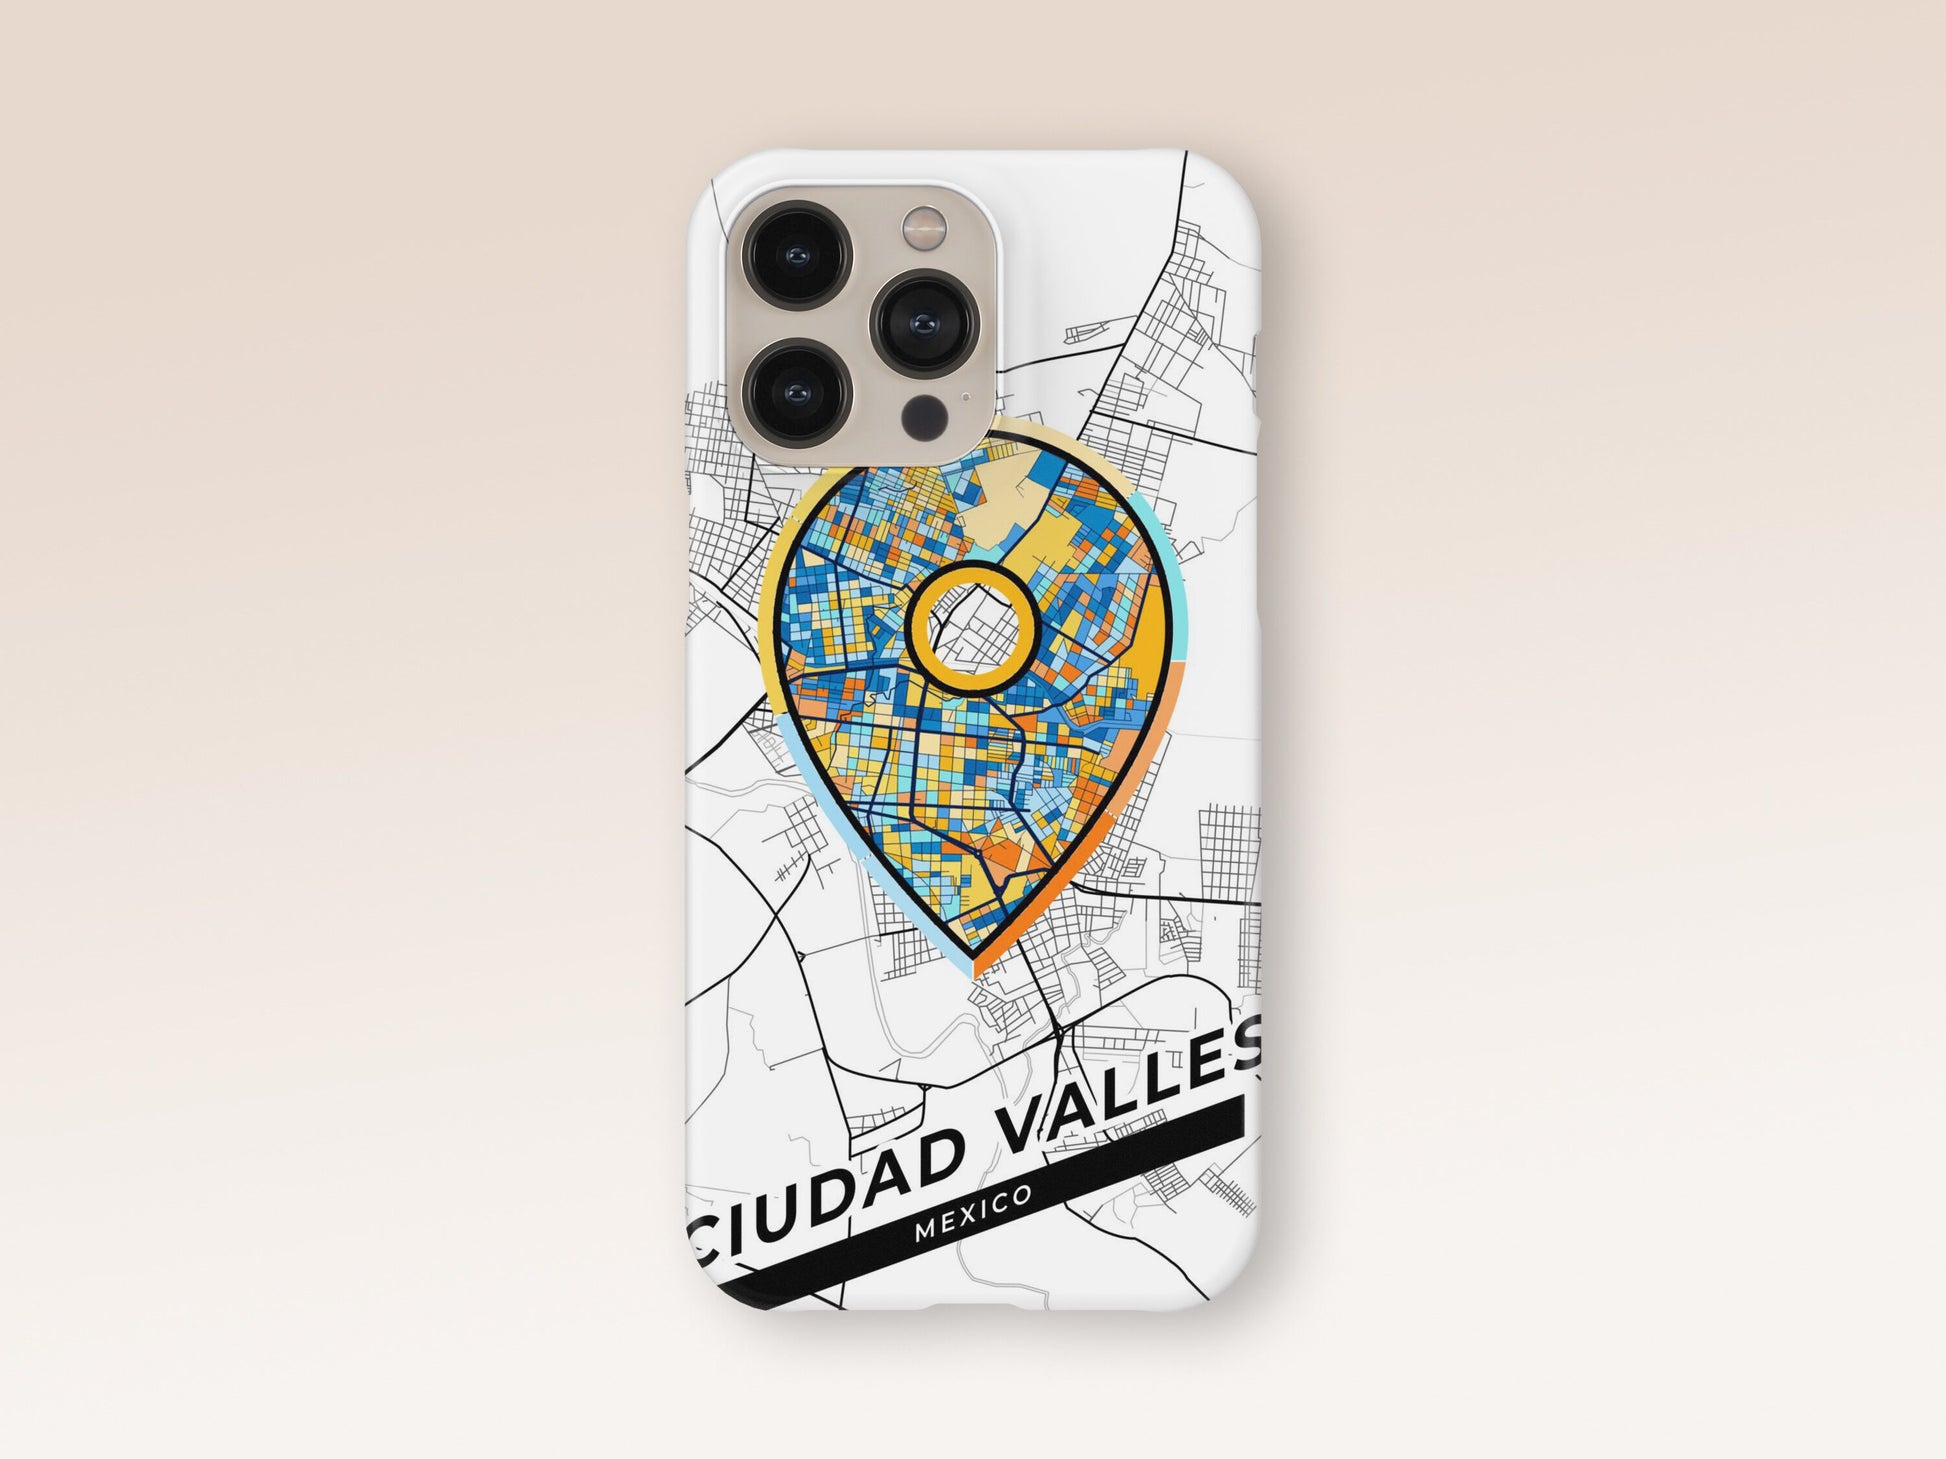 Ciudad Valles Mexico slim phone case with colorful icon. Birthday, wedding or housewarming gift. Couple match cases. 1